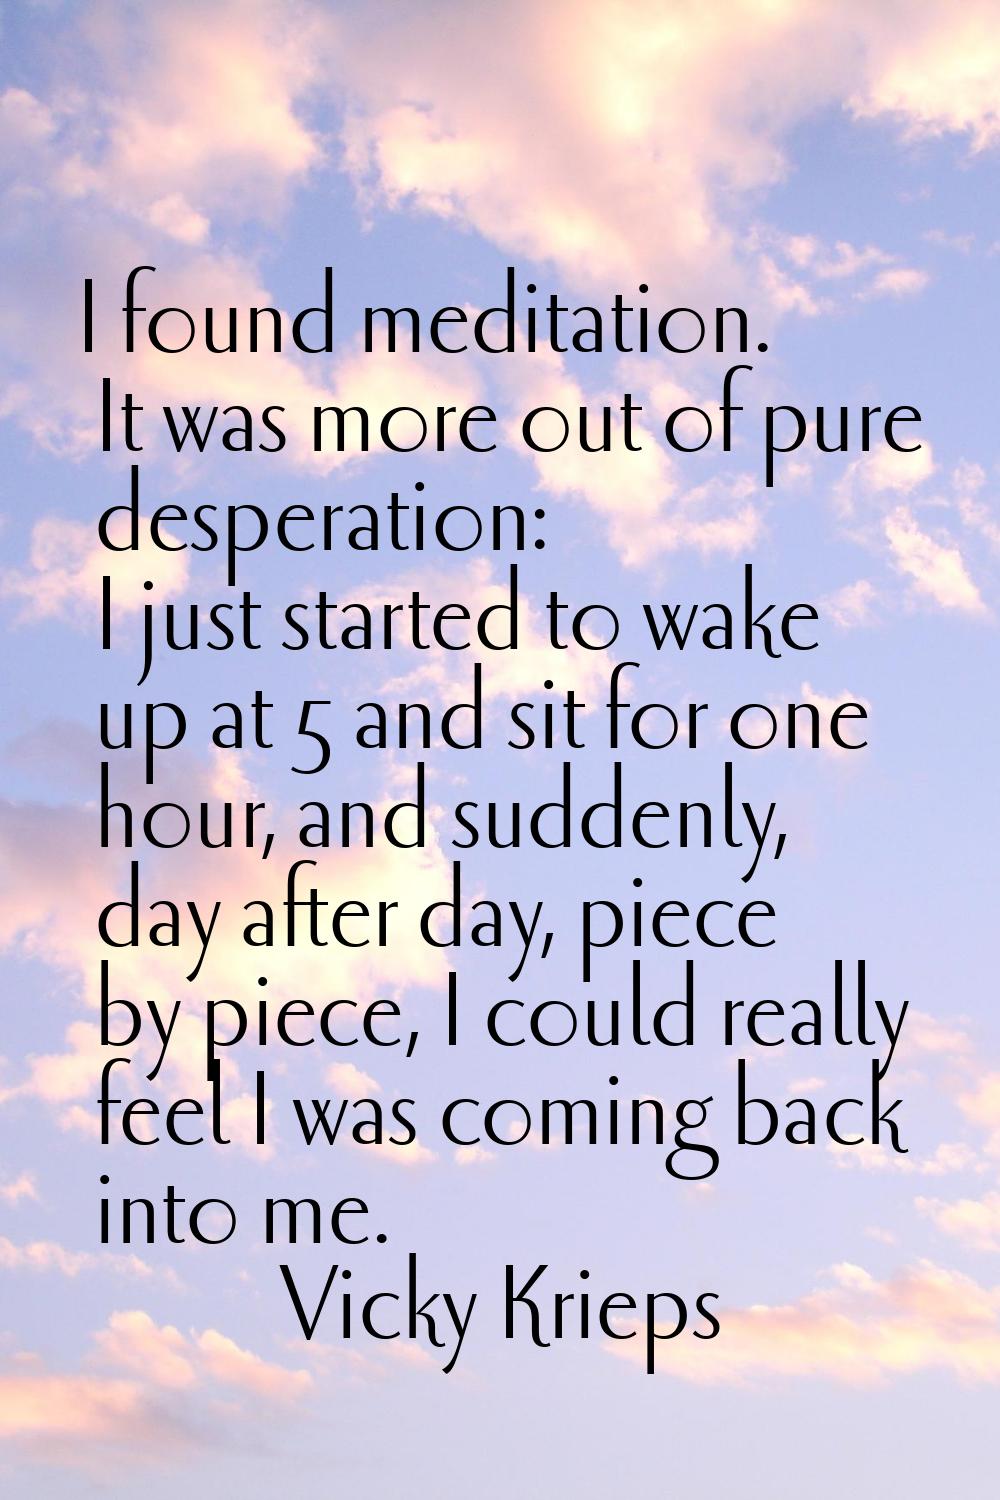 I found meditation. It was more out of pure desperation: I just started to wake up at 5 and sit for